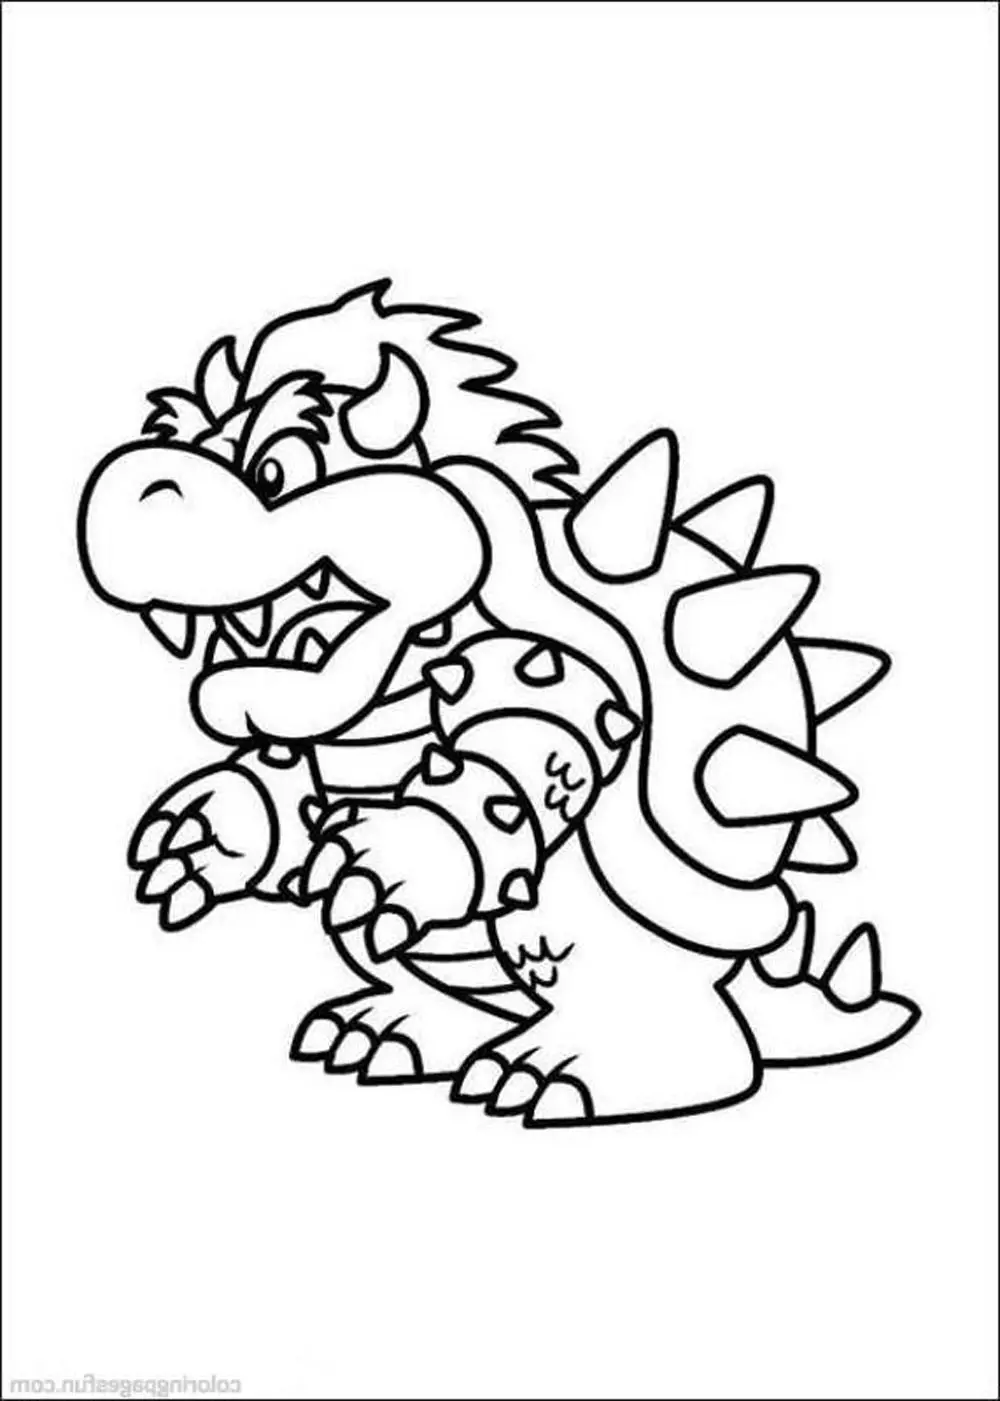 Print & Download - Mario Coloring Pages Themes